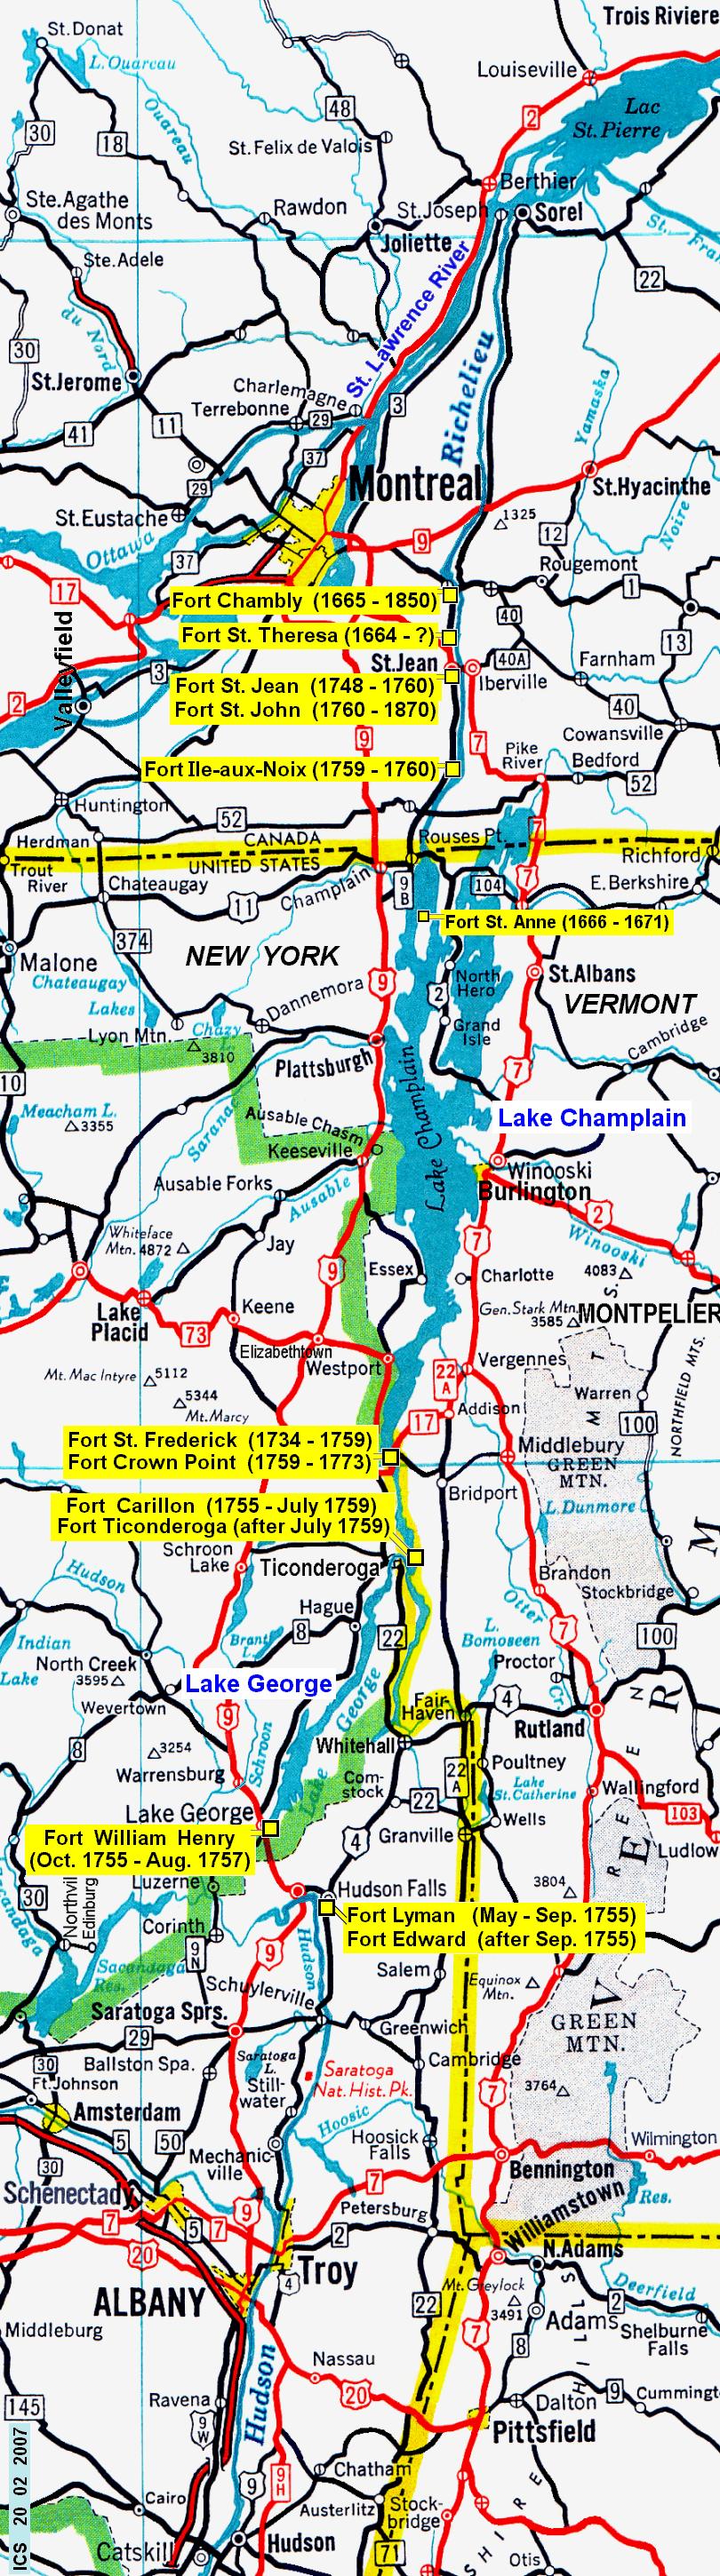 French and Indian War, map showing the Lake Champlain waterway connecting New York with Canada